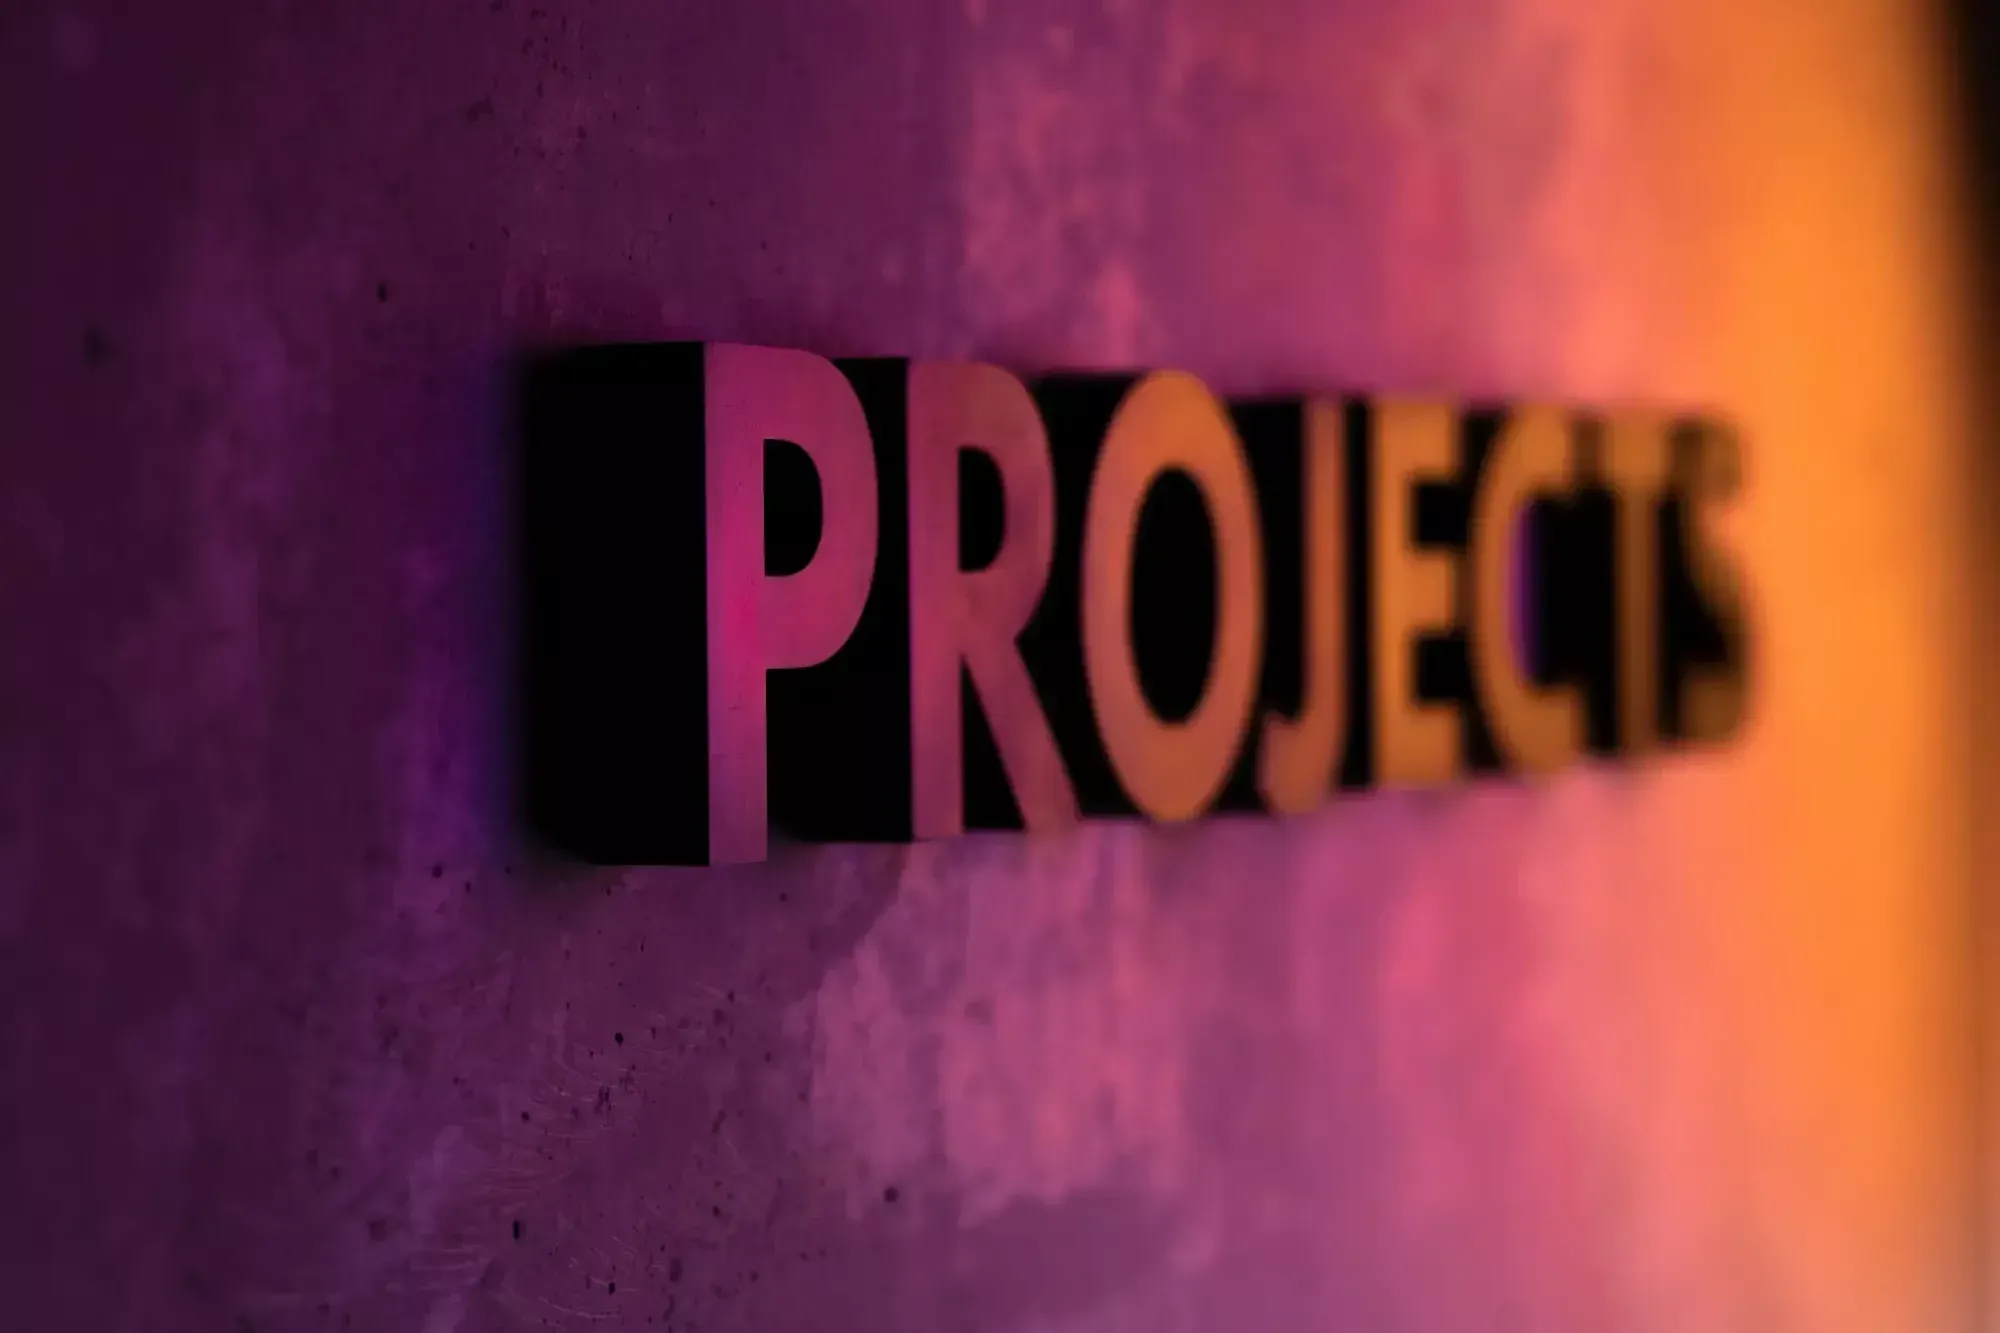 "PROJECTS" as wall decoration in pink-orange light.